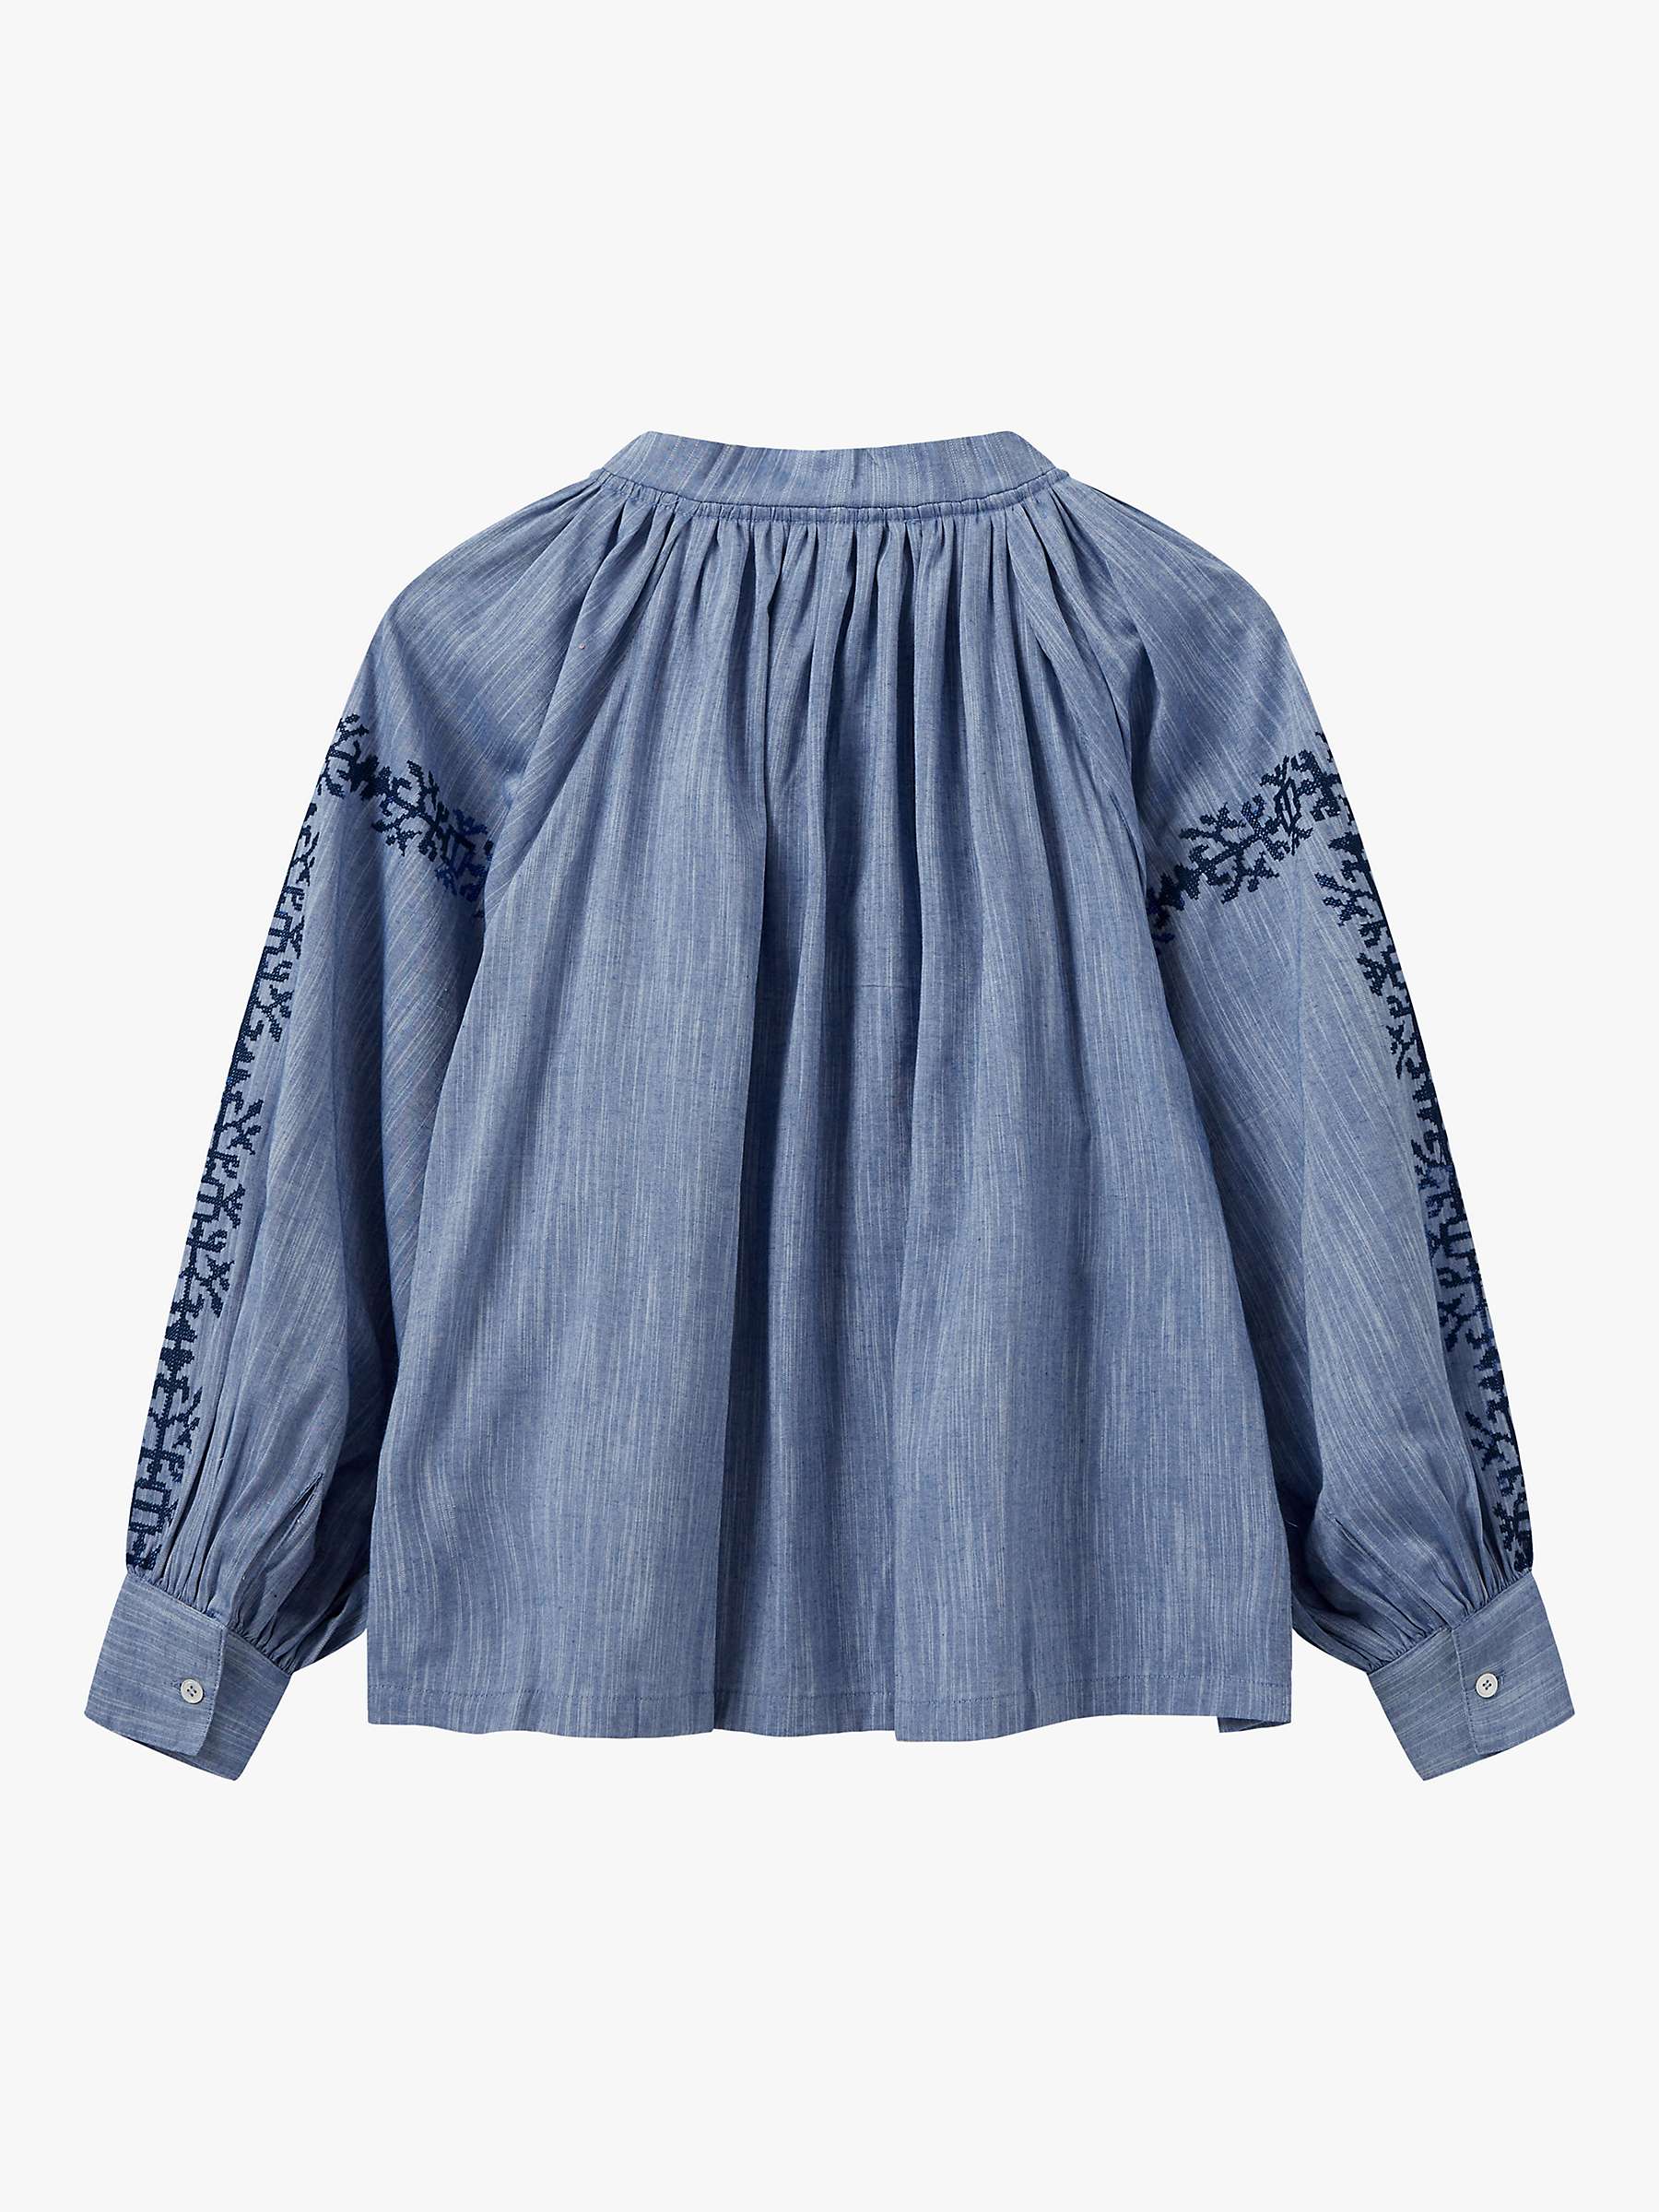 Buy MOS MOSH Tessa Embroidered Long Sleeve Shirt, Blue Shadow Online at johnlewis.com